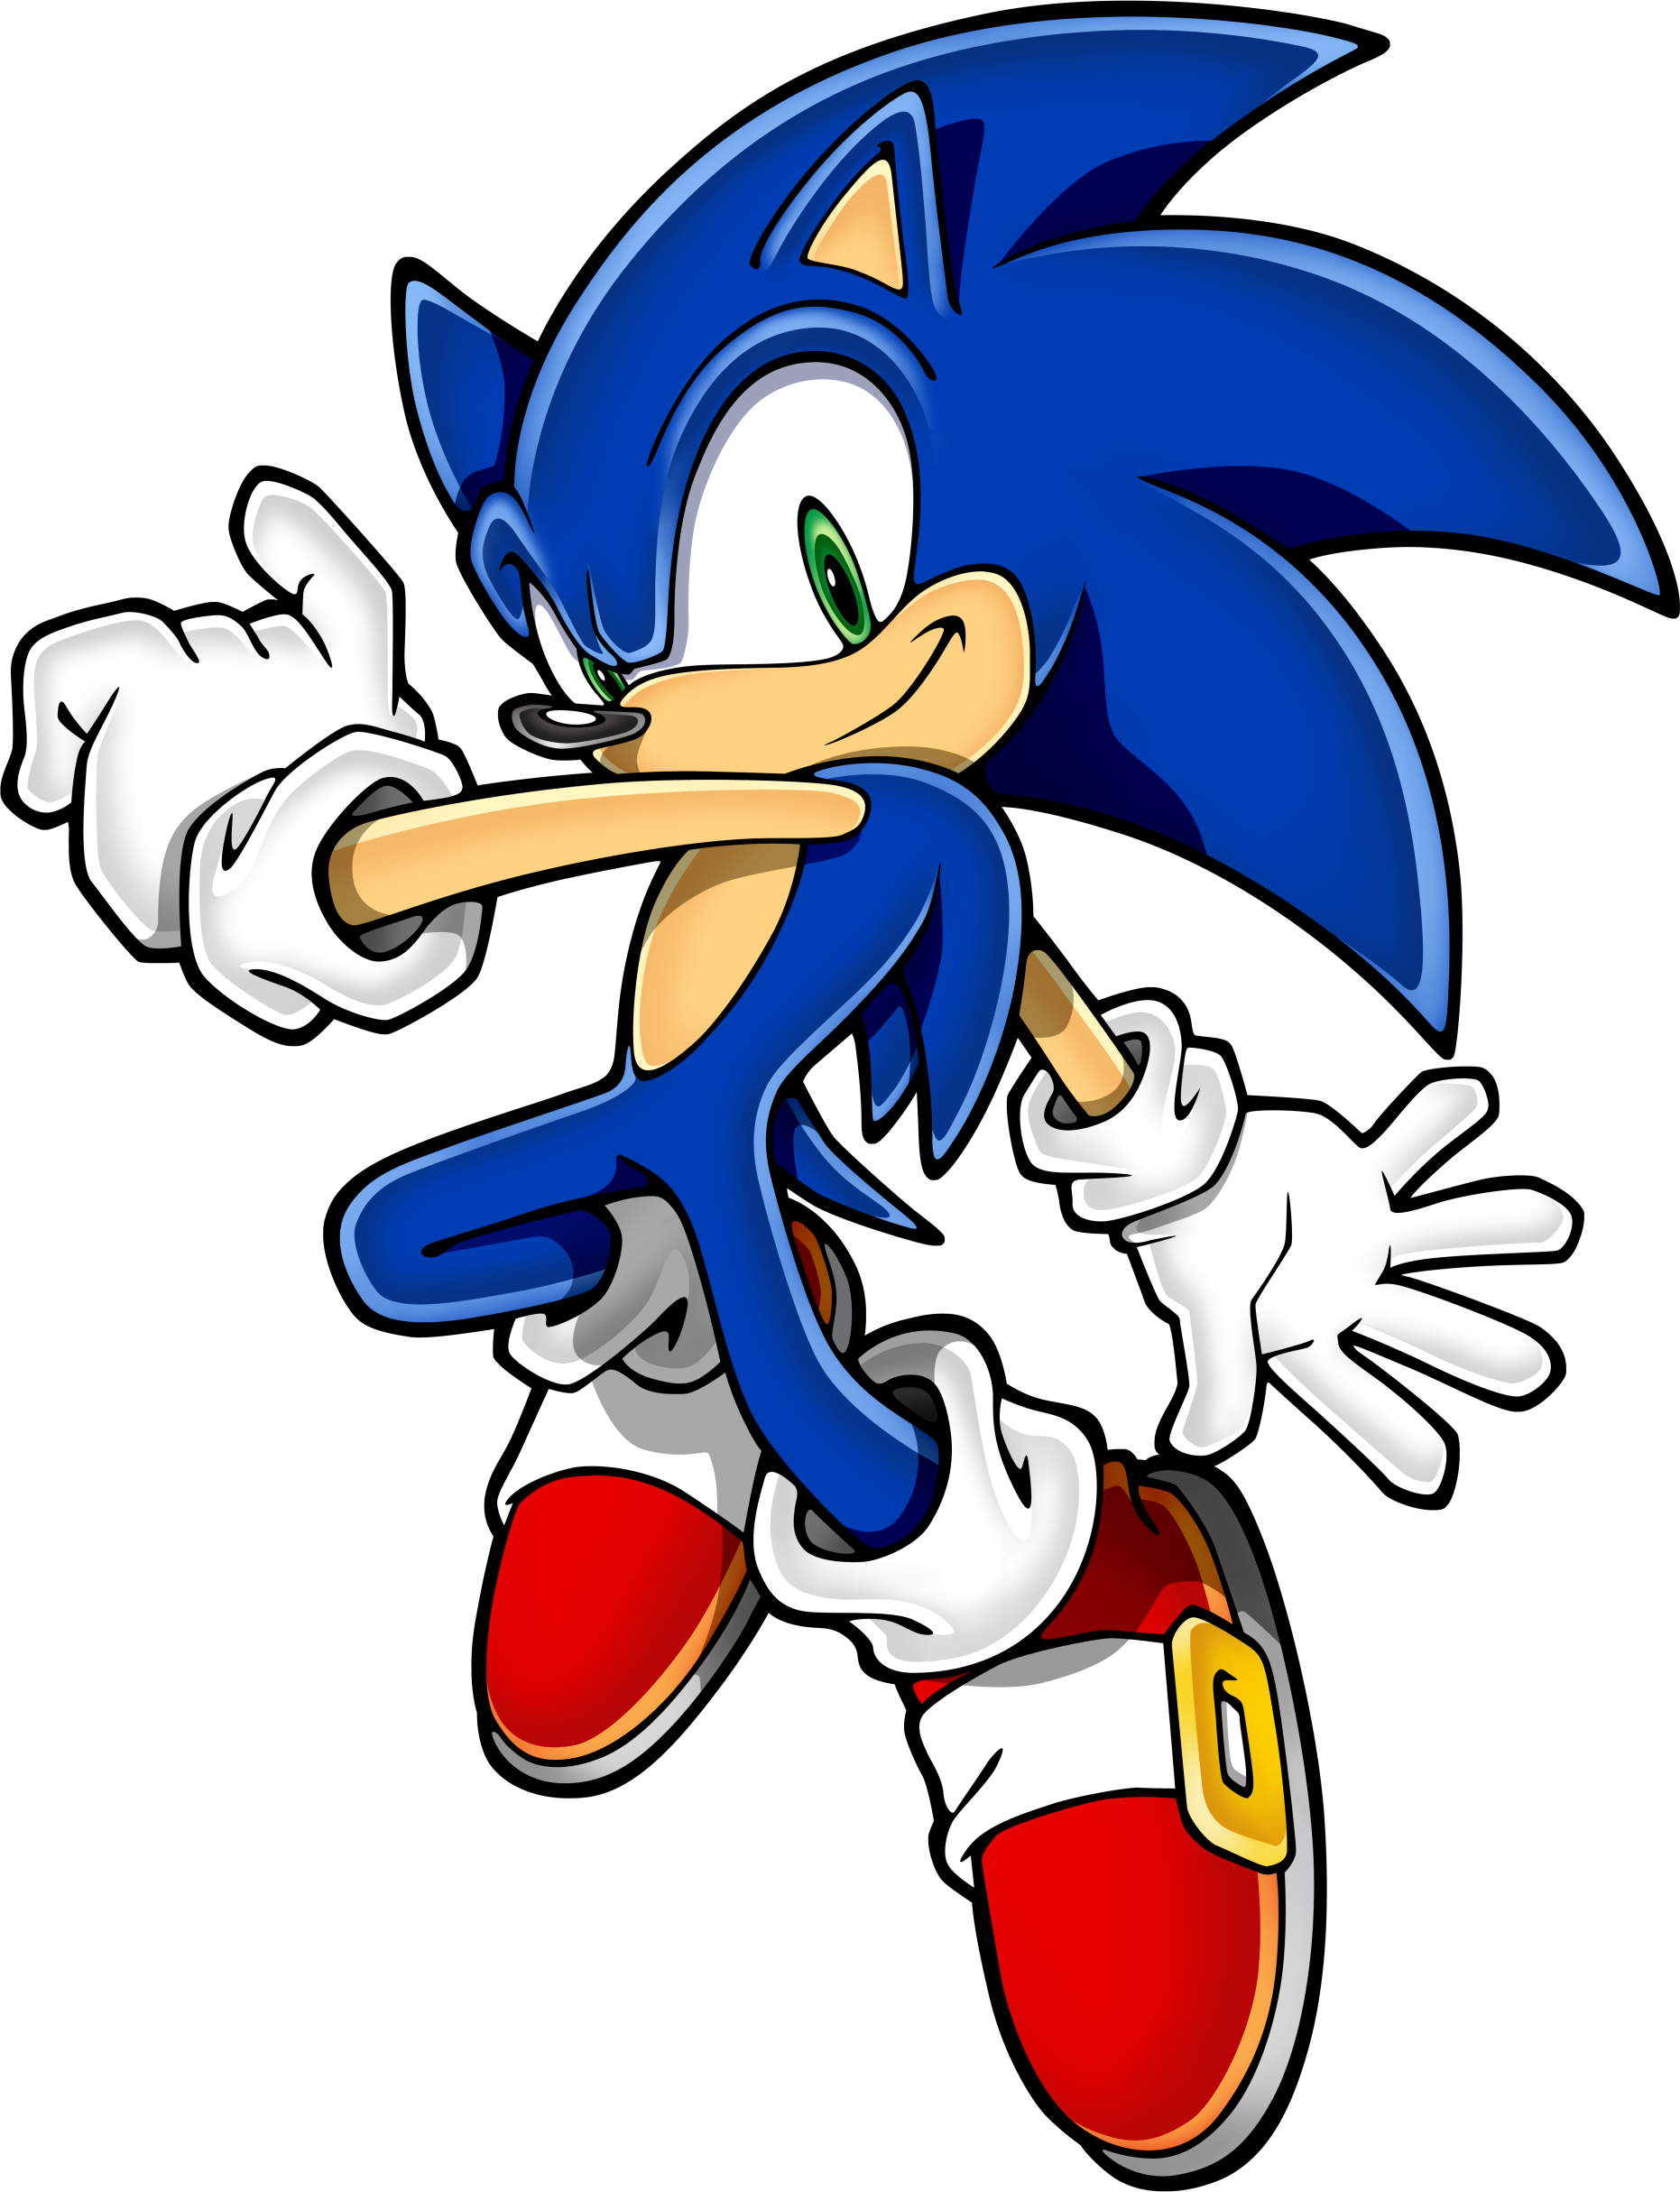 Sonic the Hedgehog from Sonic